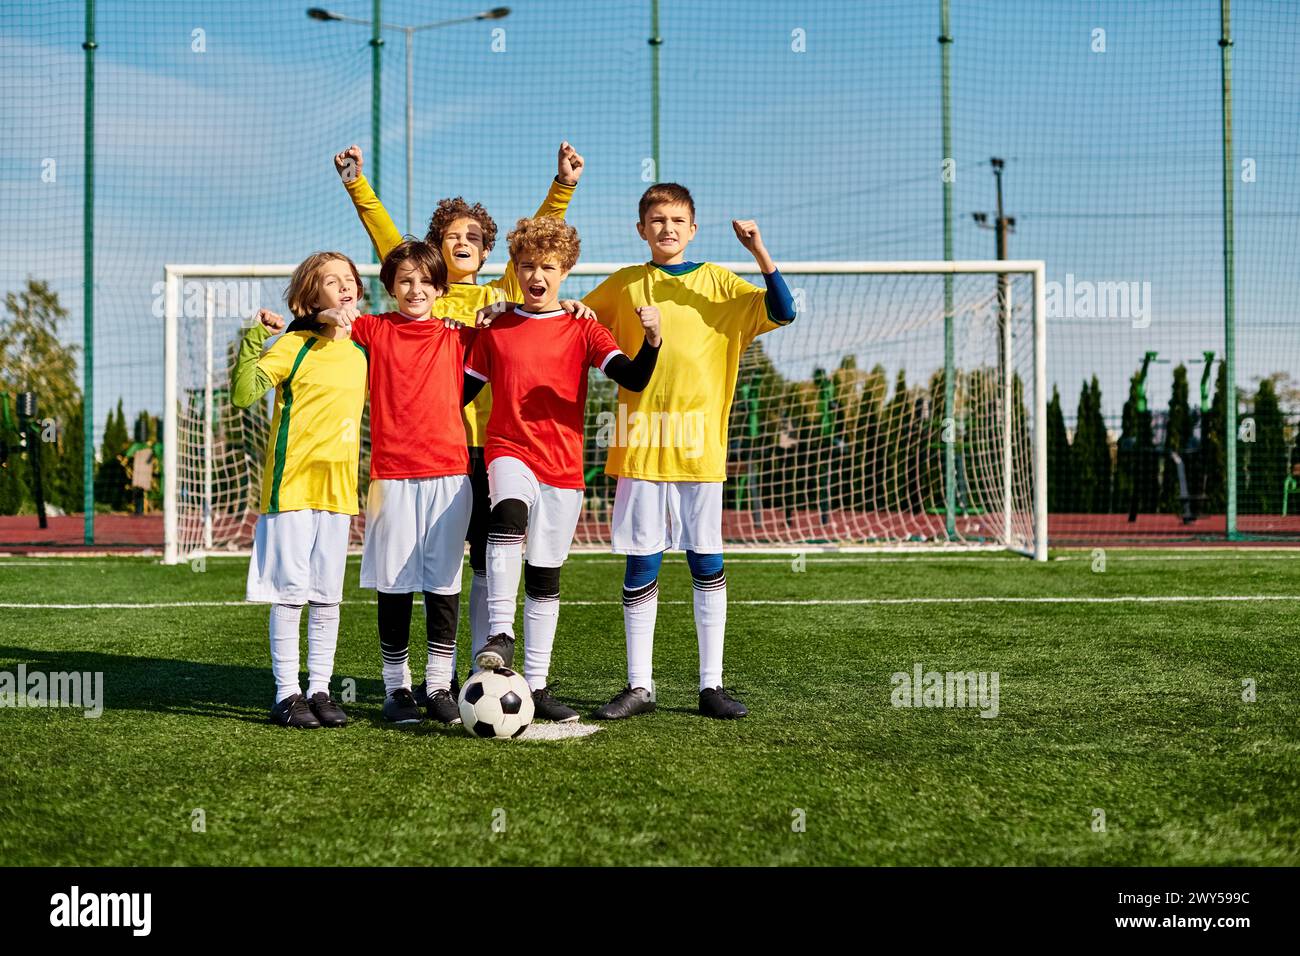 A group of young children, filled with energy and enthusiasm, stand triumphantly on top of a soccer field, celebrating their teamwork and victory. Stock Photo